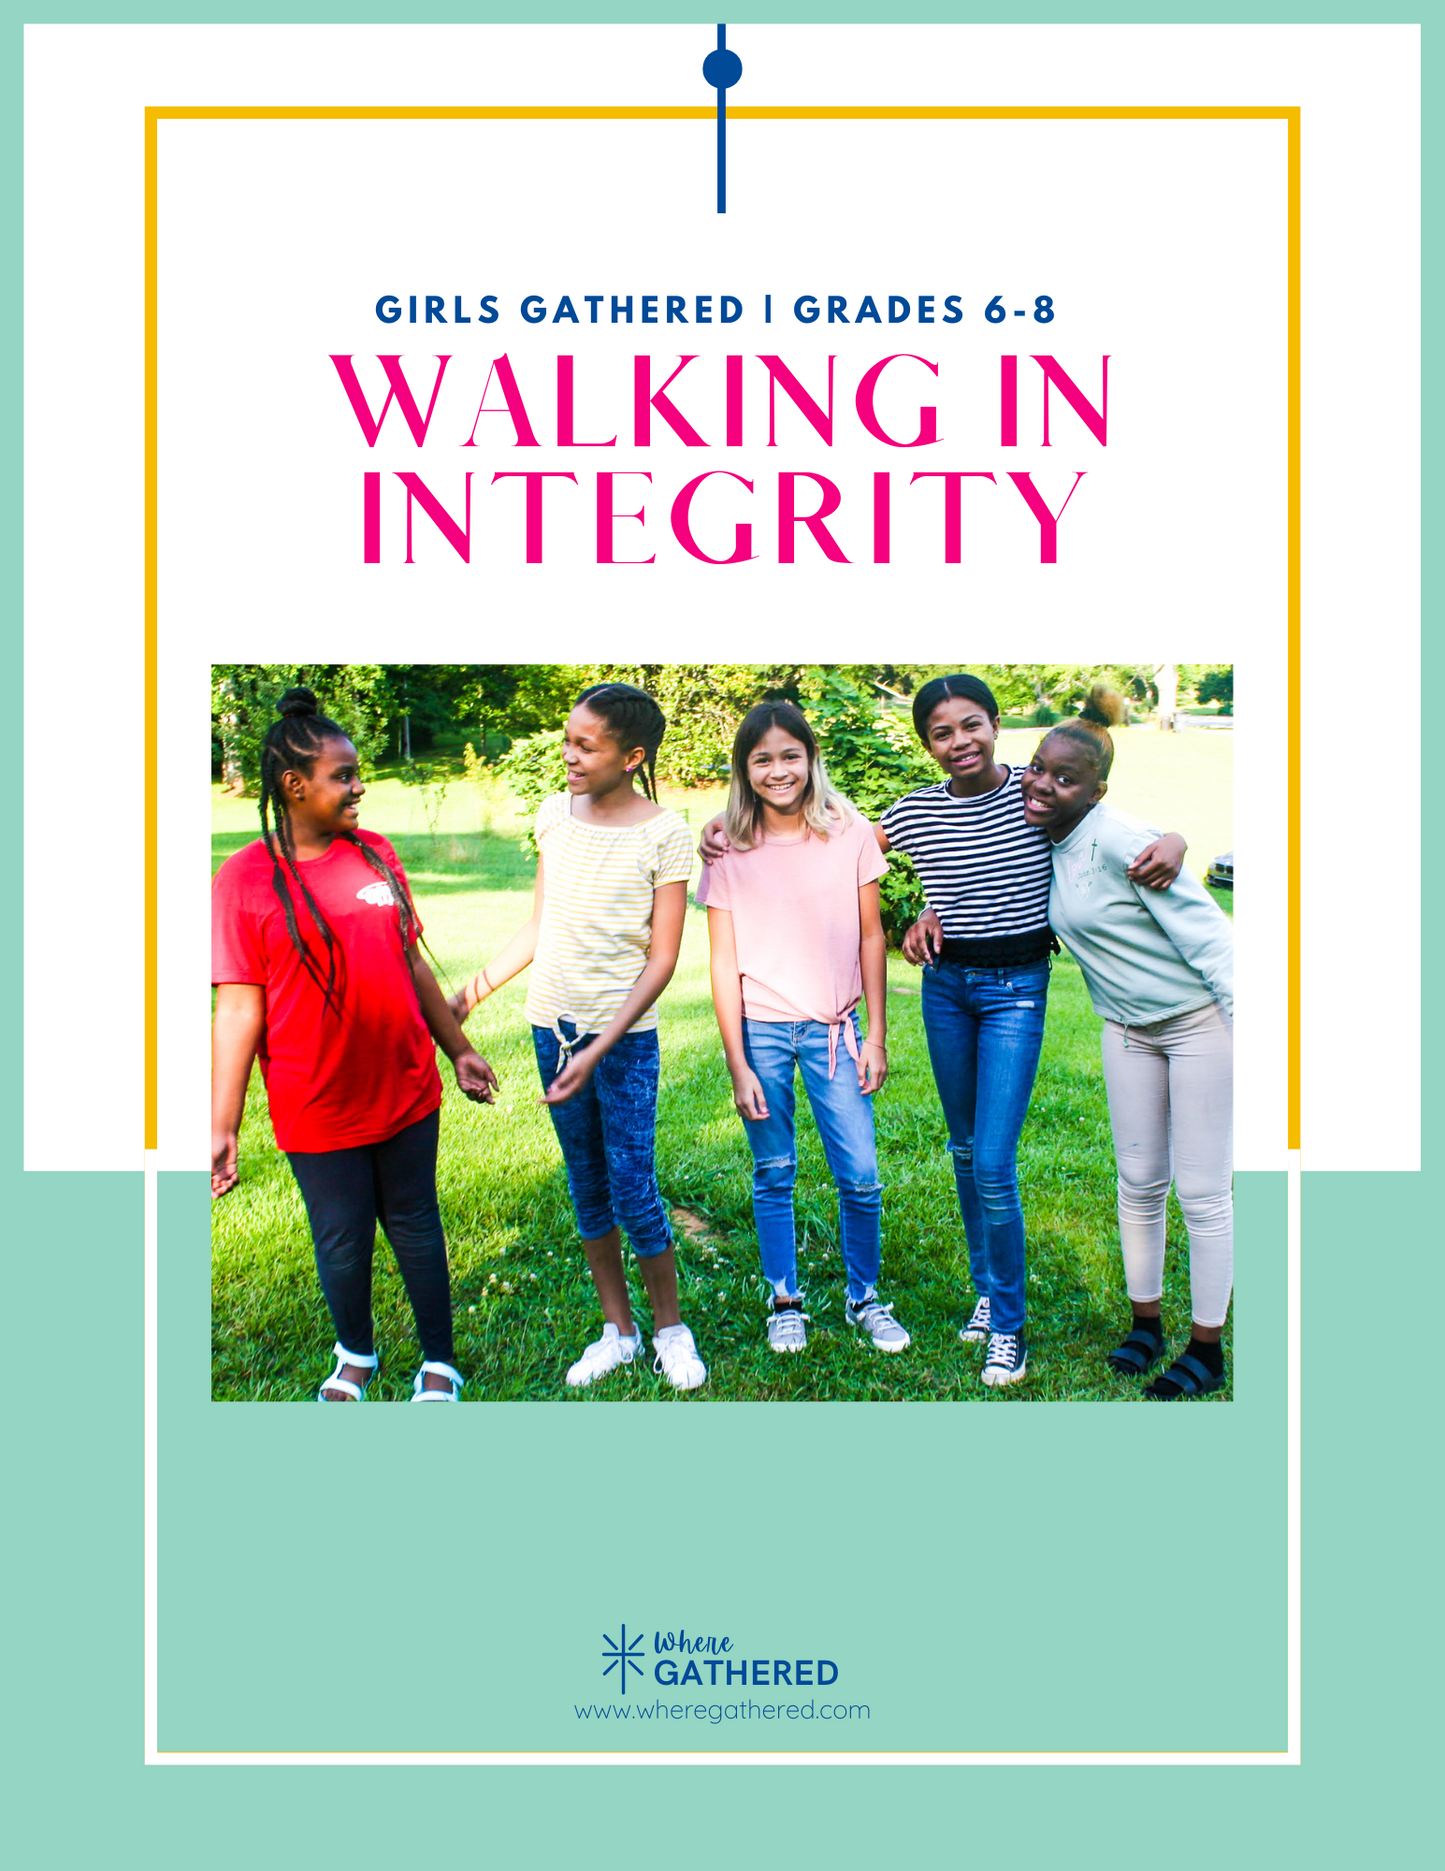 A cover of the Life Group Kit for kids Bible study lesson about Walking in Integrity for middle school girls.